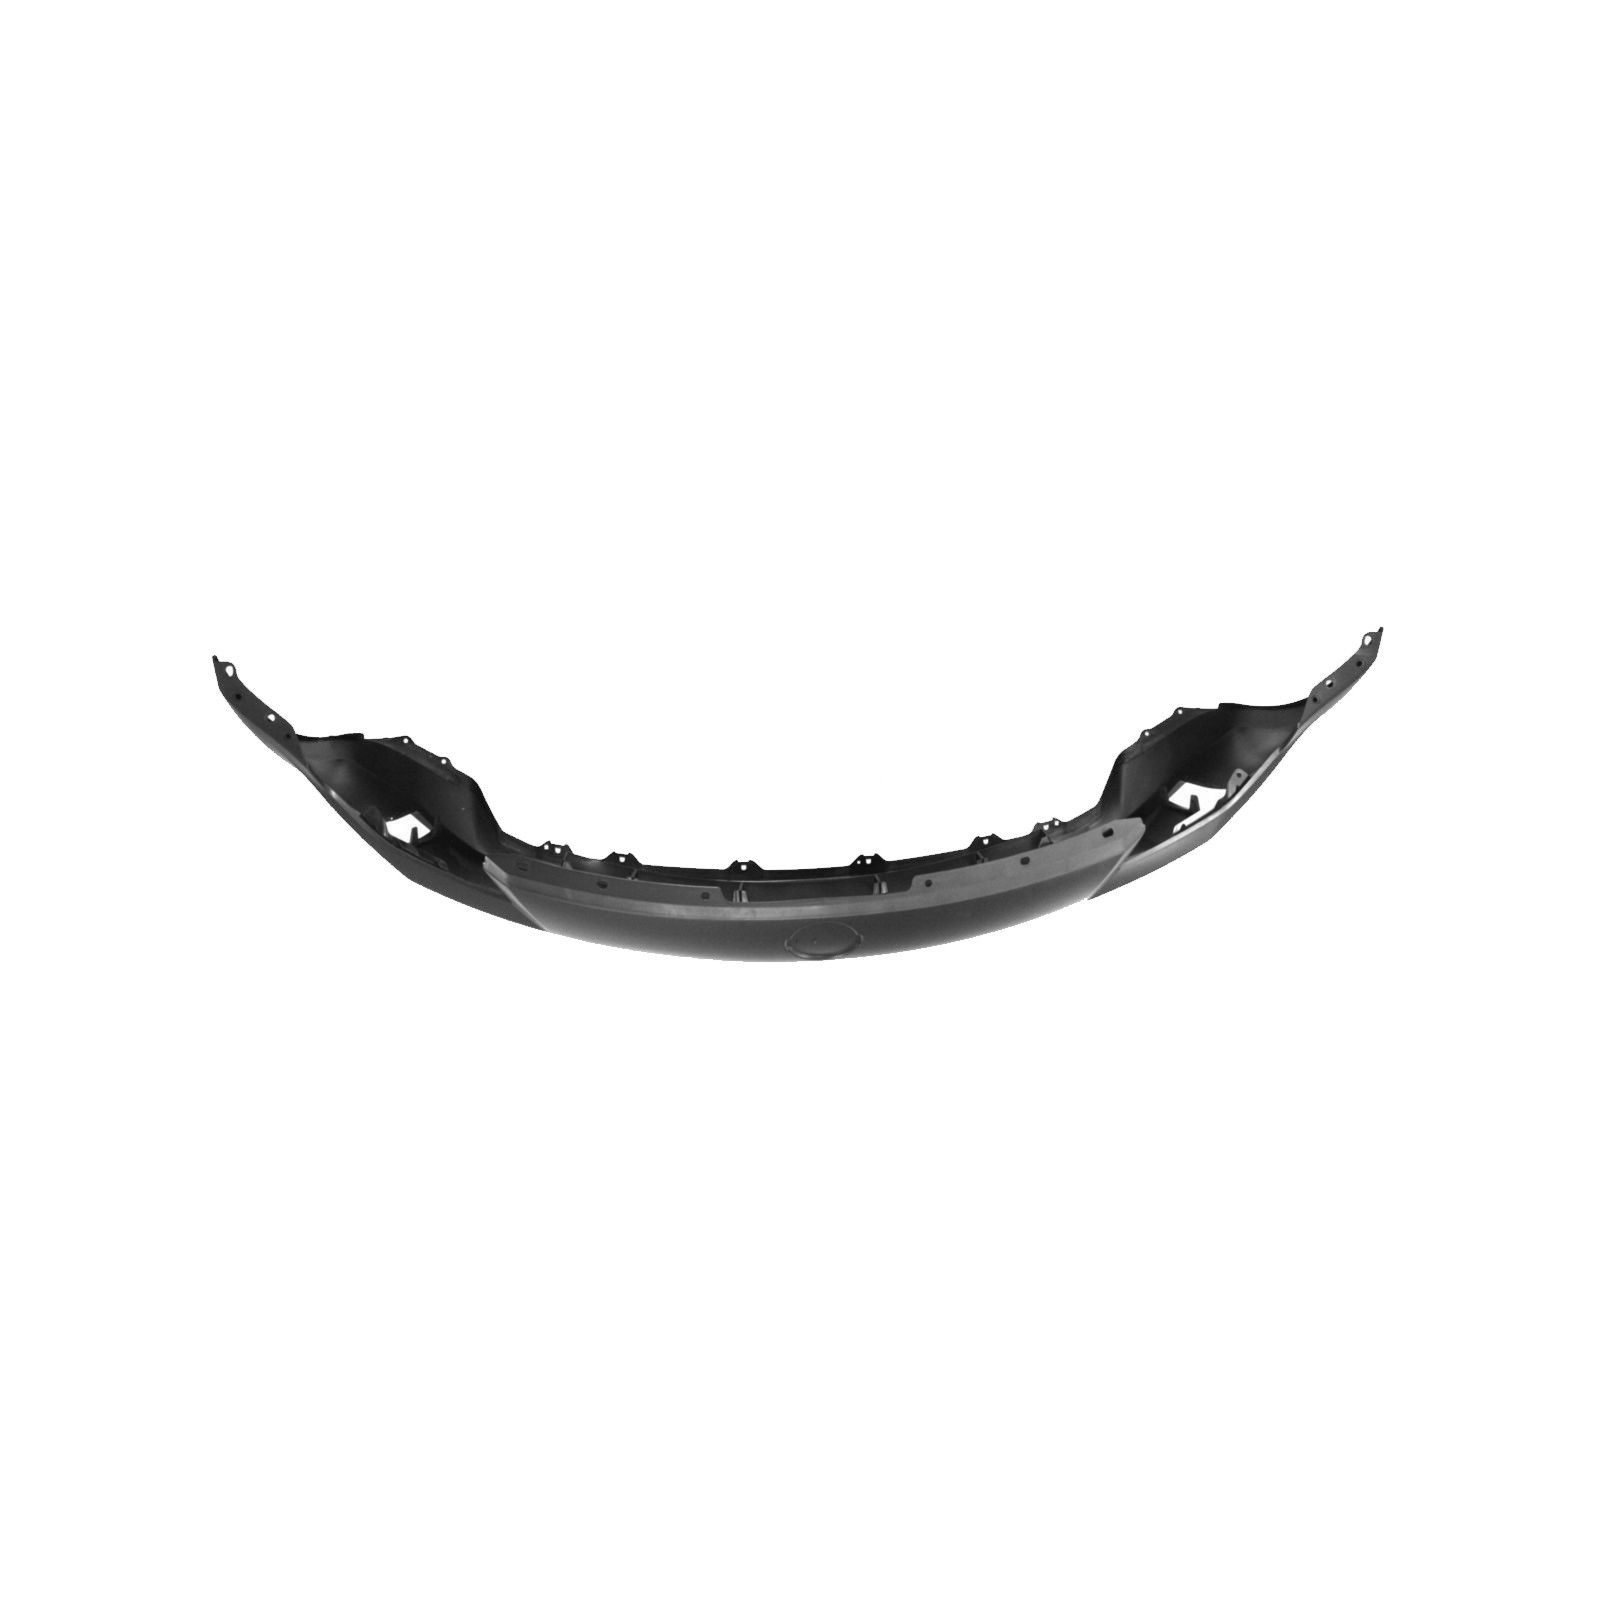 2006-2011 NISSAN 350Z FRONT Bumper Cover Painted to Match